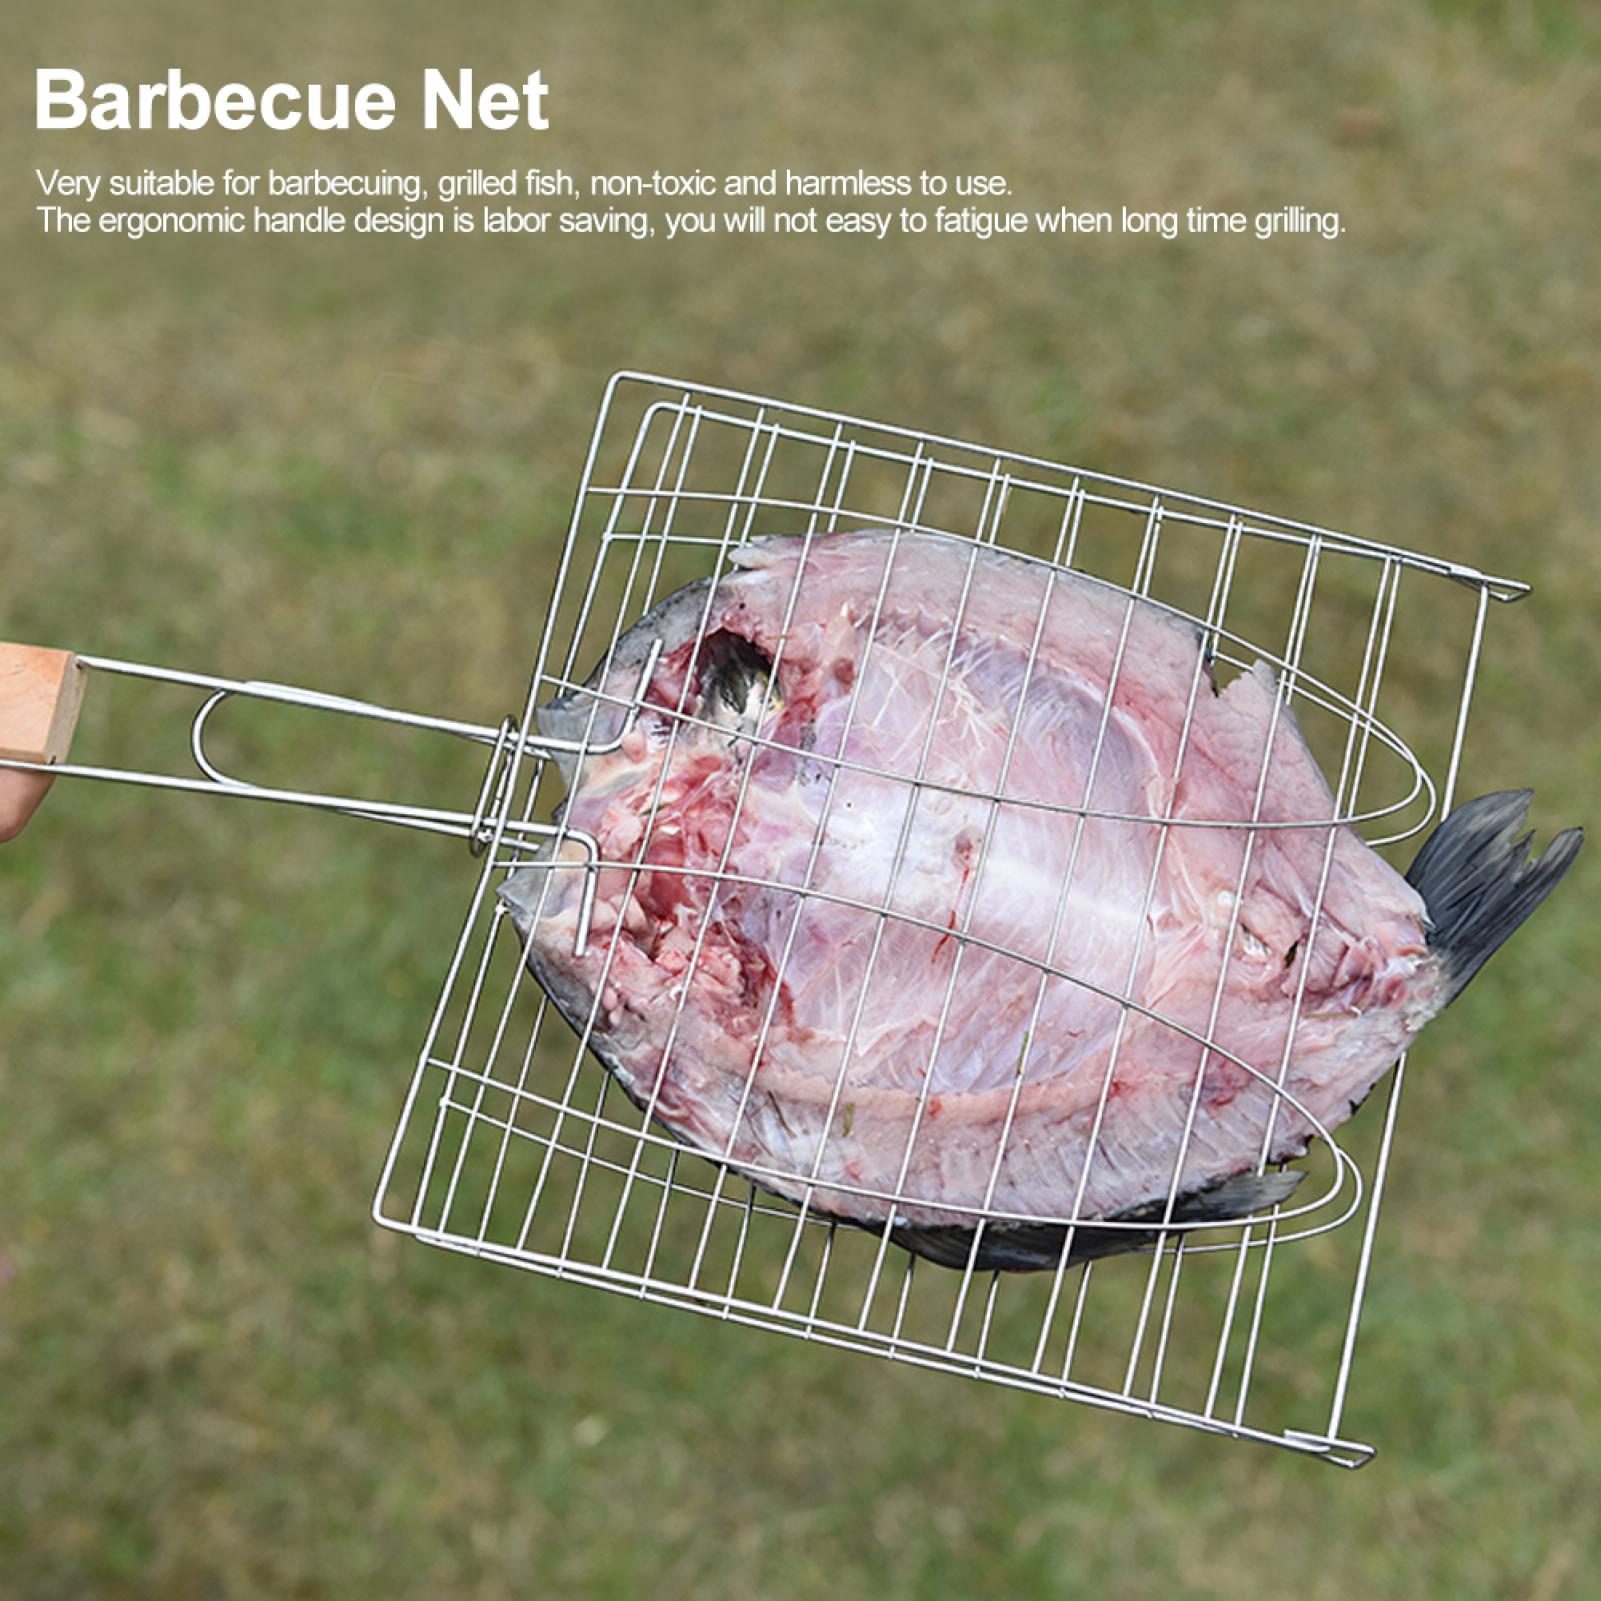 Mgaxyff Stainless Steel Non-Stick Handle BBQ Net Barbecue Mesh Fish Meat Grill Basket for BBQ Oven - image 5 of 8